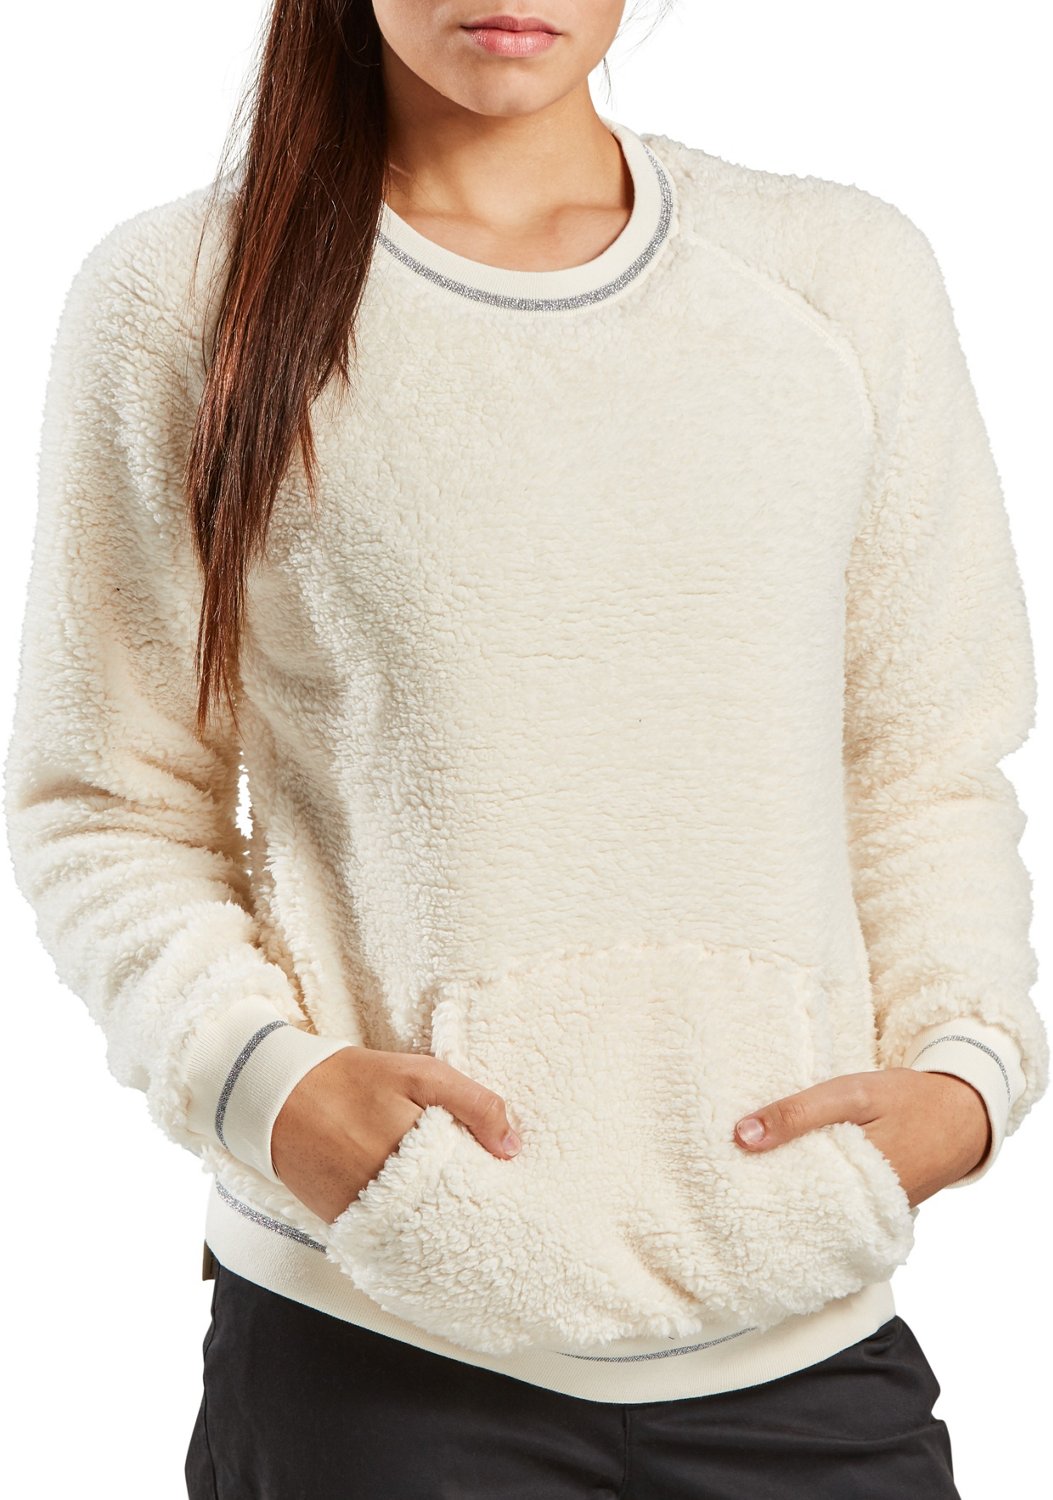 women's athletic sweaters